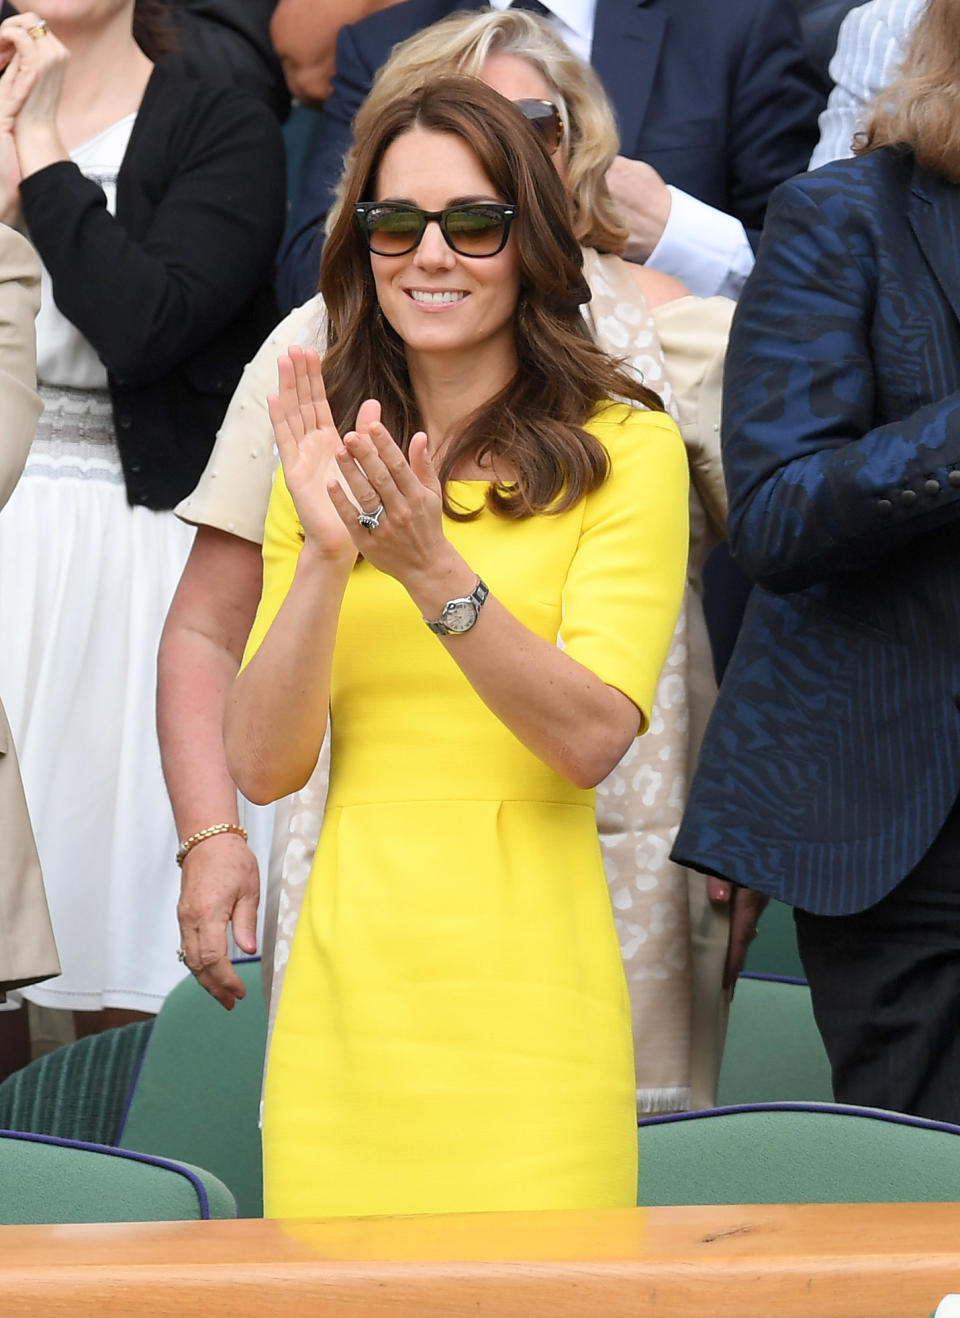 Duchess of Cambridge attends day ten of the Wimbledon Tennis Championships at Wimbledon in July 2016 wearing Ray-Ban sunglasses.  (Getty Images)